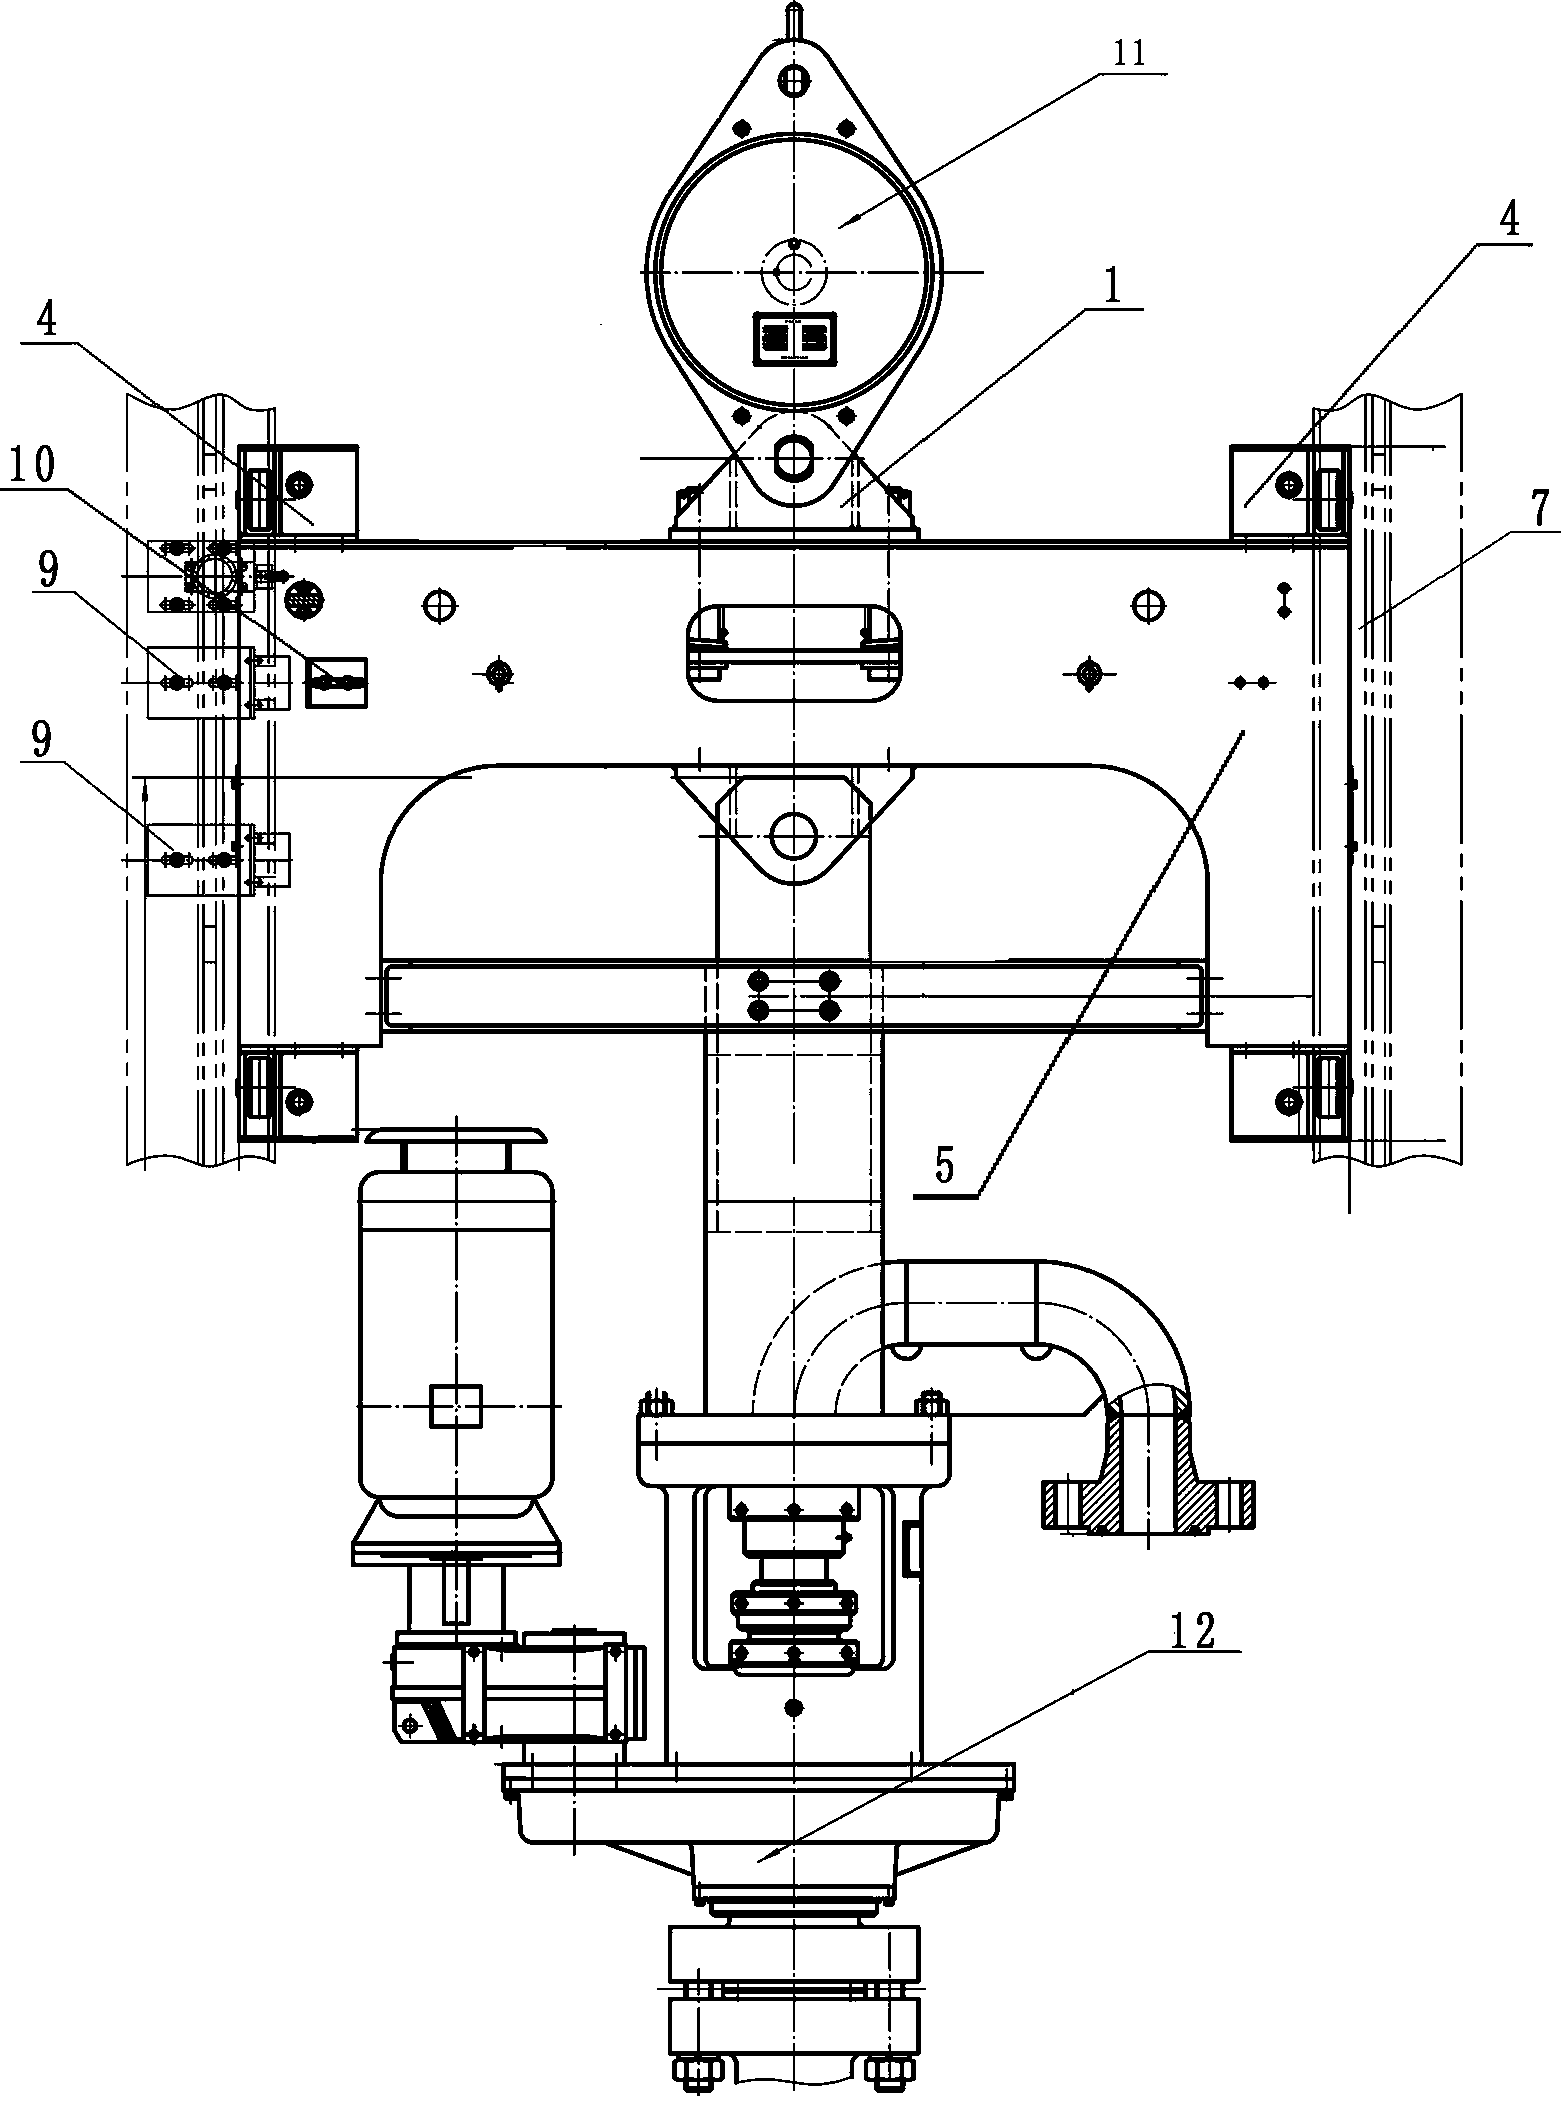 Anti-dropping device for hydraulic decoking system